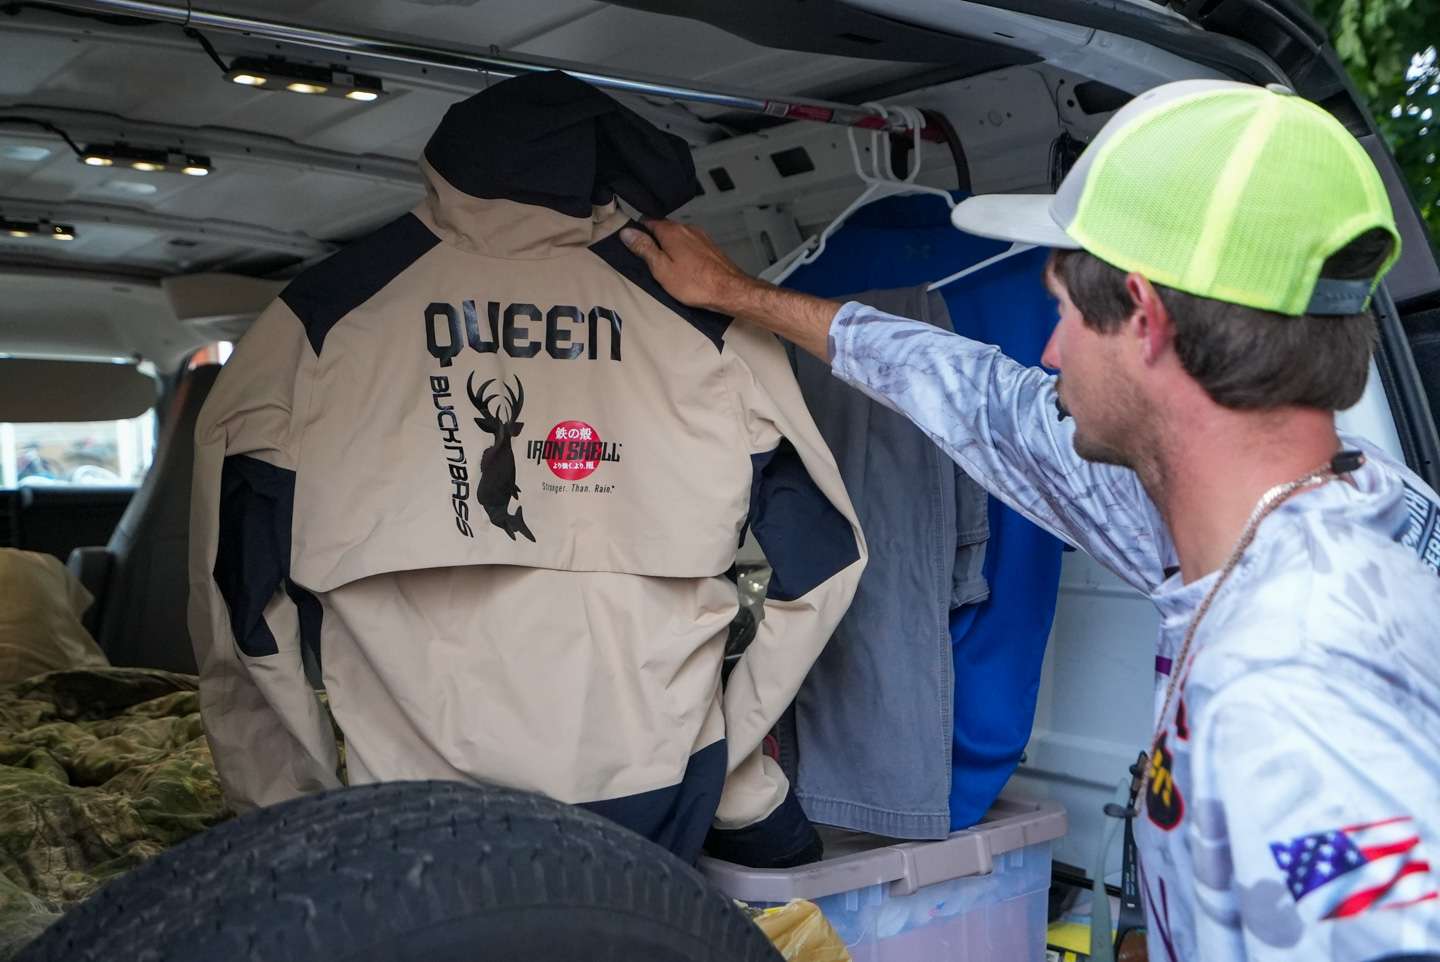 Queen placed a bar across the back of the van to hang his rain suit and other clothes from. 